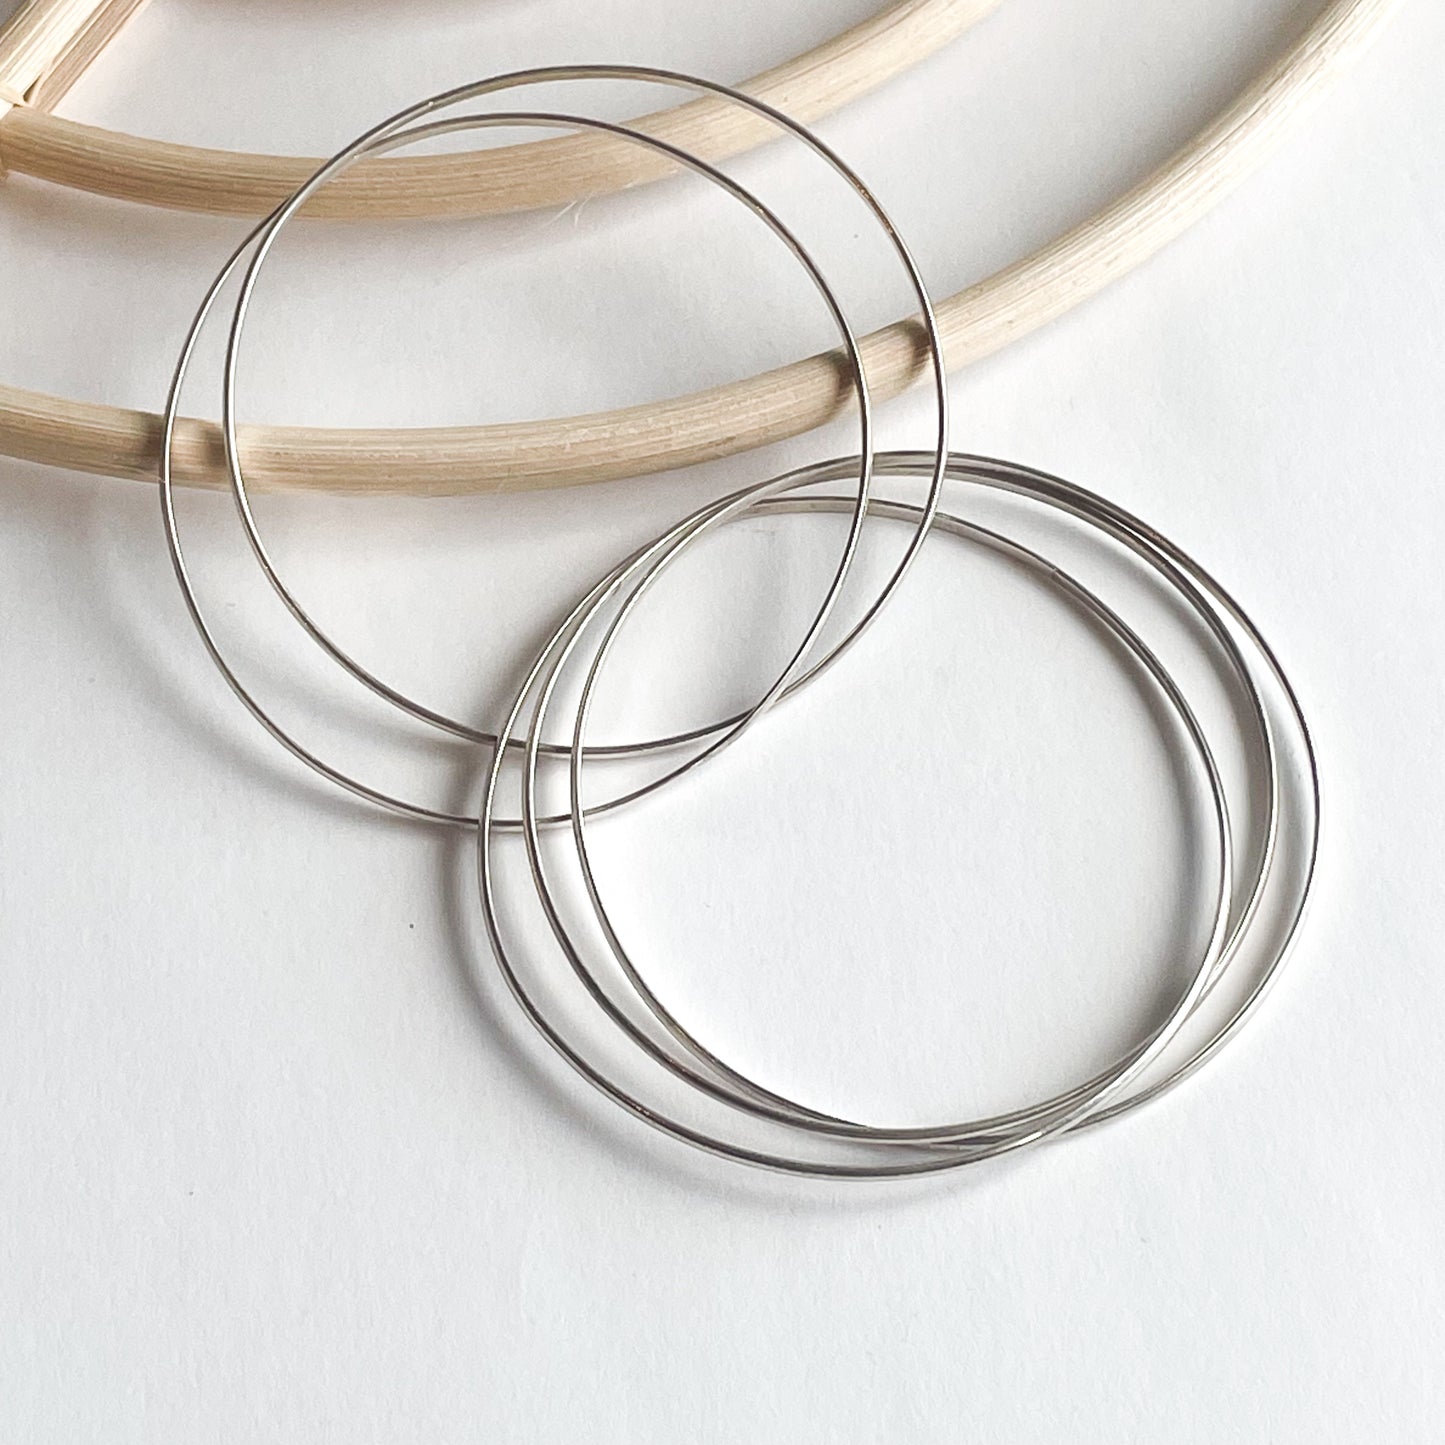 Multi Thin Intertwined Bangle - Solid Sterling Silver